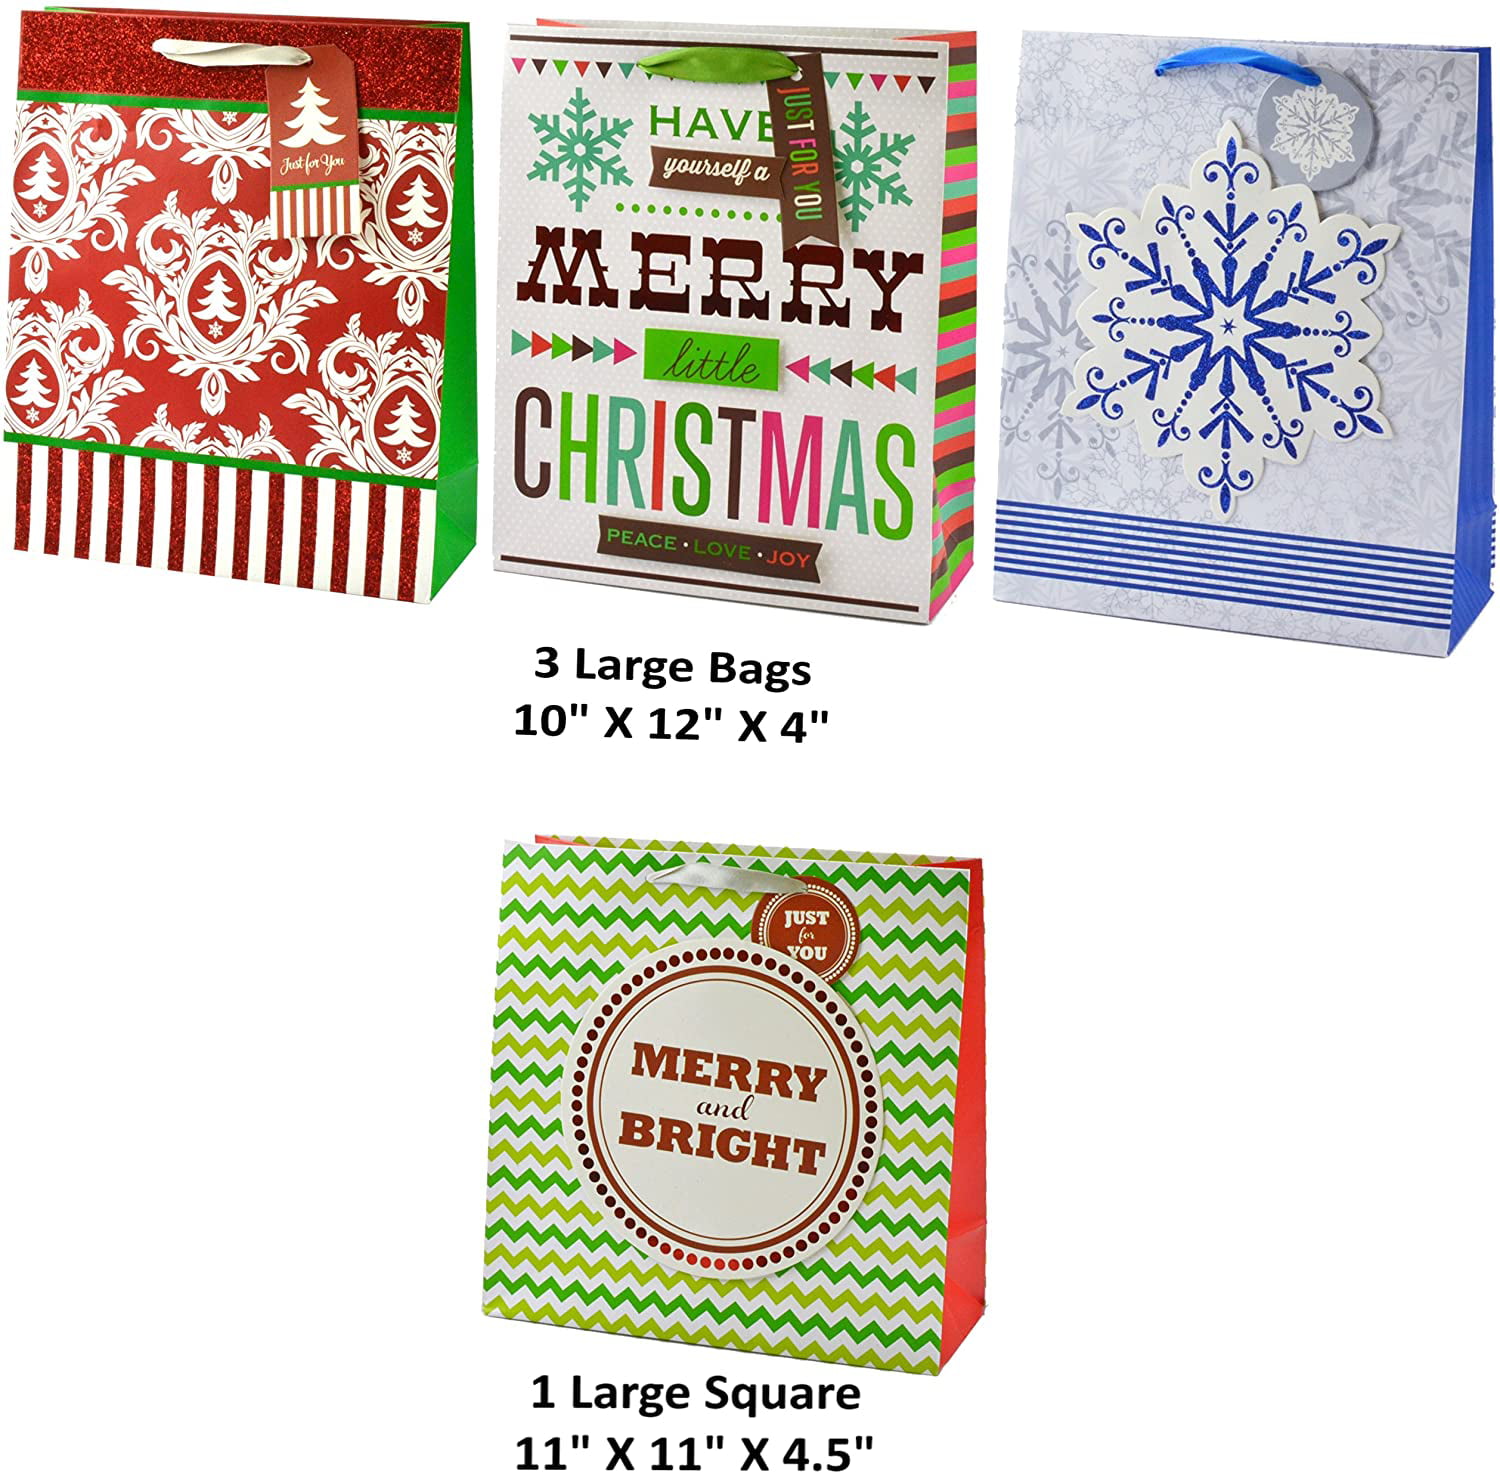 22 Piece 11 Bags Of 4 Different Designs 3 Sizes Large medium small & 11 White Tissue Papers Christmas Holiday Glow-In-The-Dark Gift Bag Gift Set With Unique Luminous Festive Designs & Patterns 